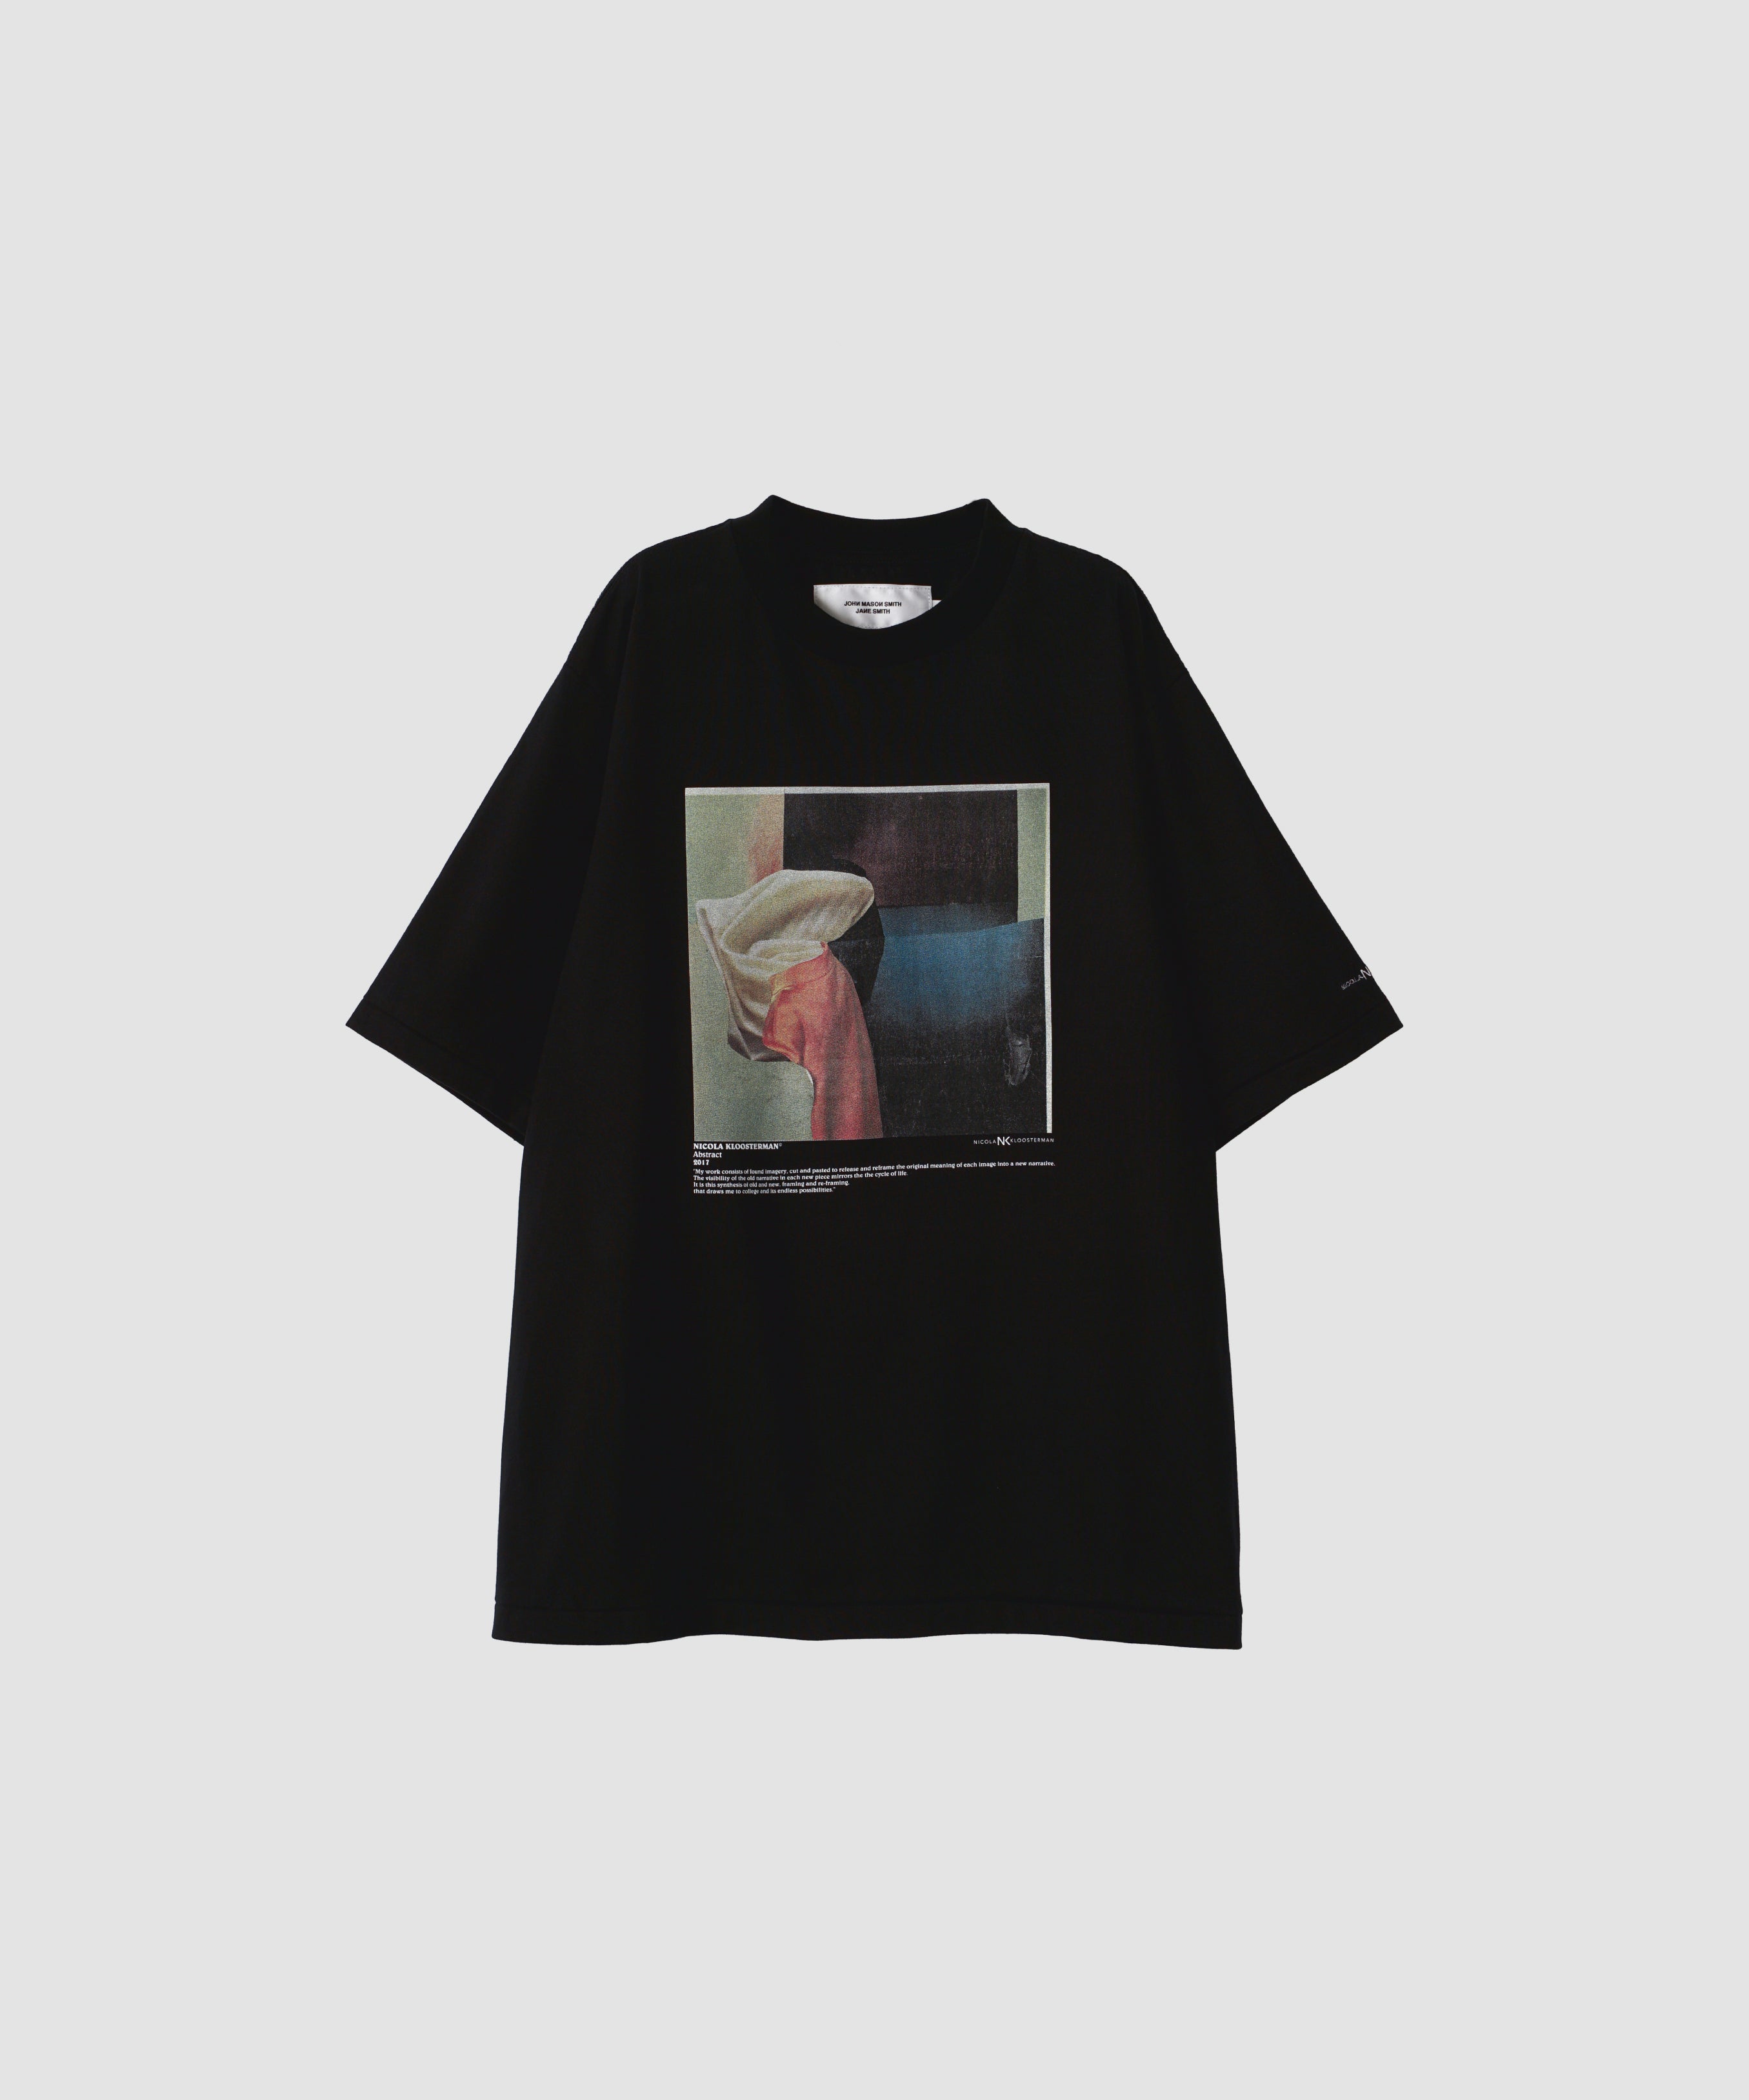 NICOLA KLOOSTERMAN ABSTRACT S/S T-SHIRT